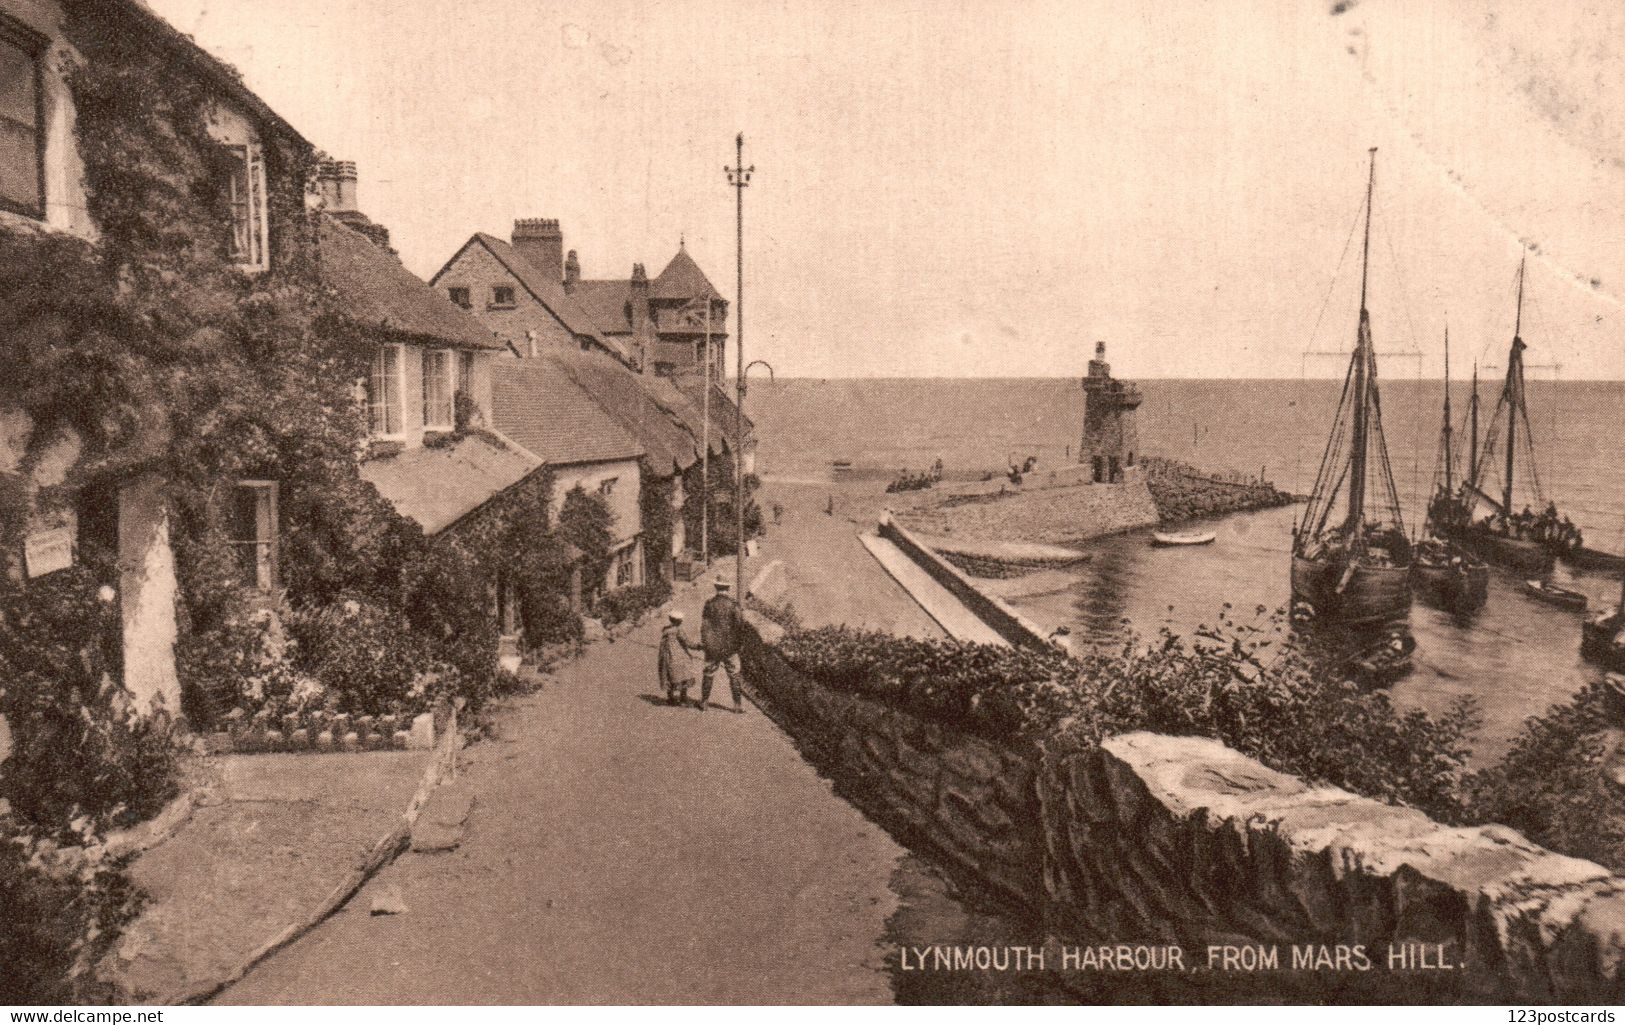 UK - Lynmouth Harbour - From Mars Hill - RARE In This Edition! - Lynmouth & Lynton